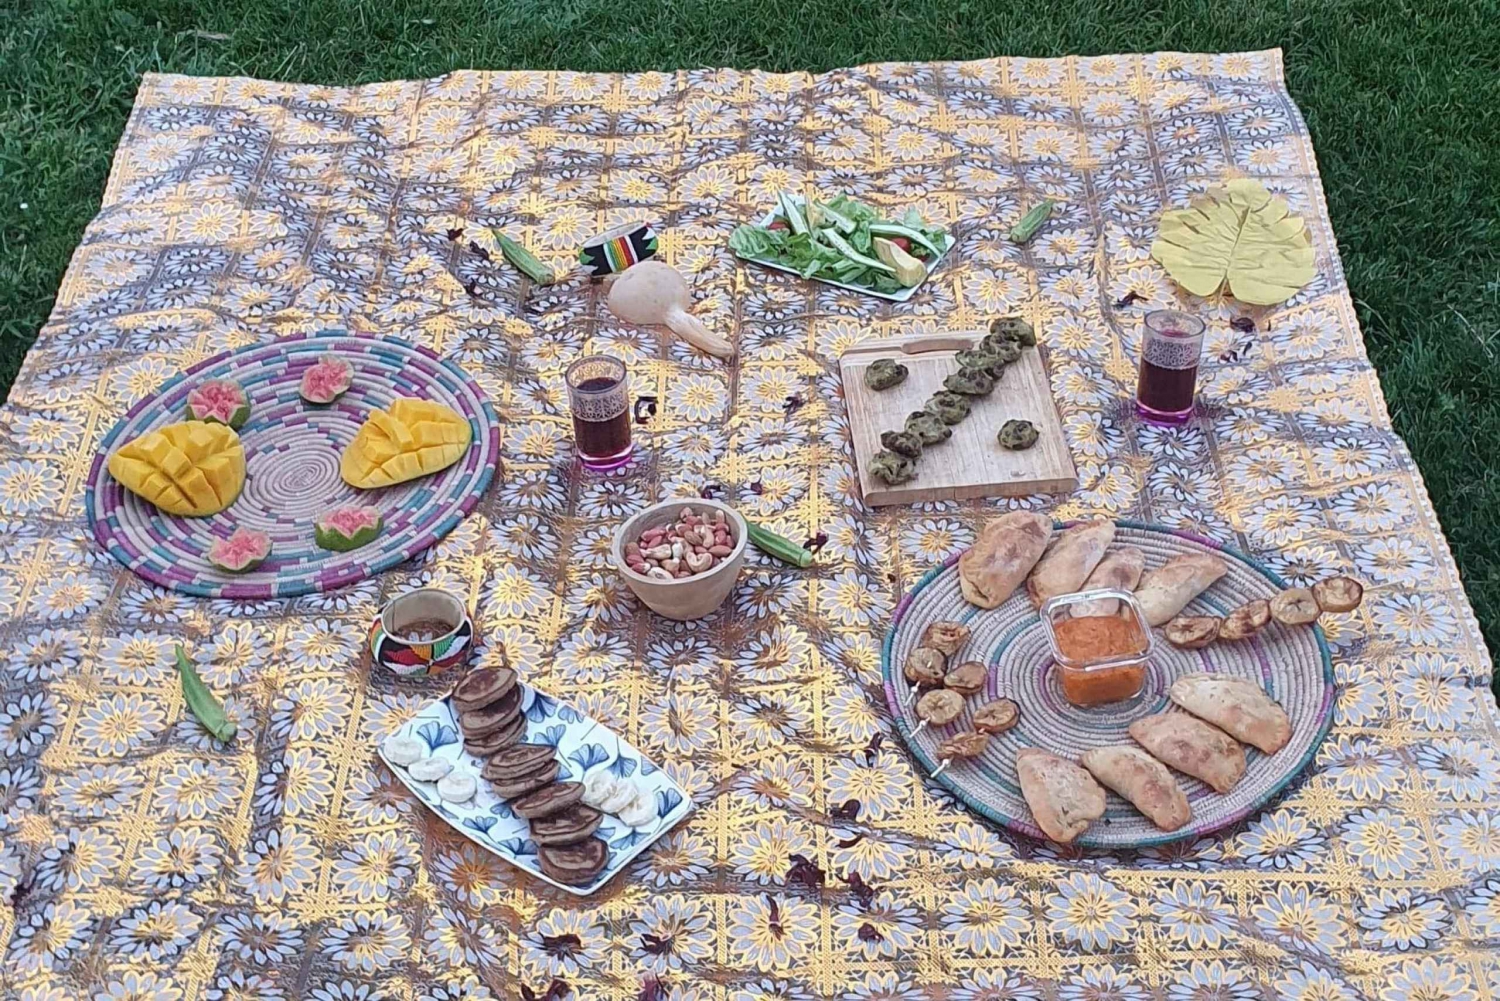 Authentic African Picnic : Tasty and cultural time in Paris